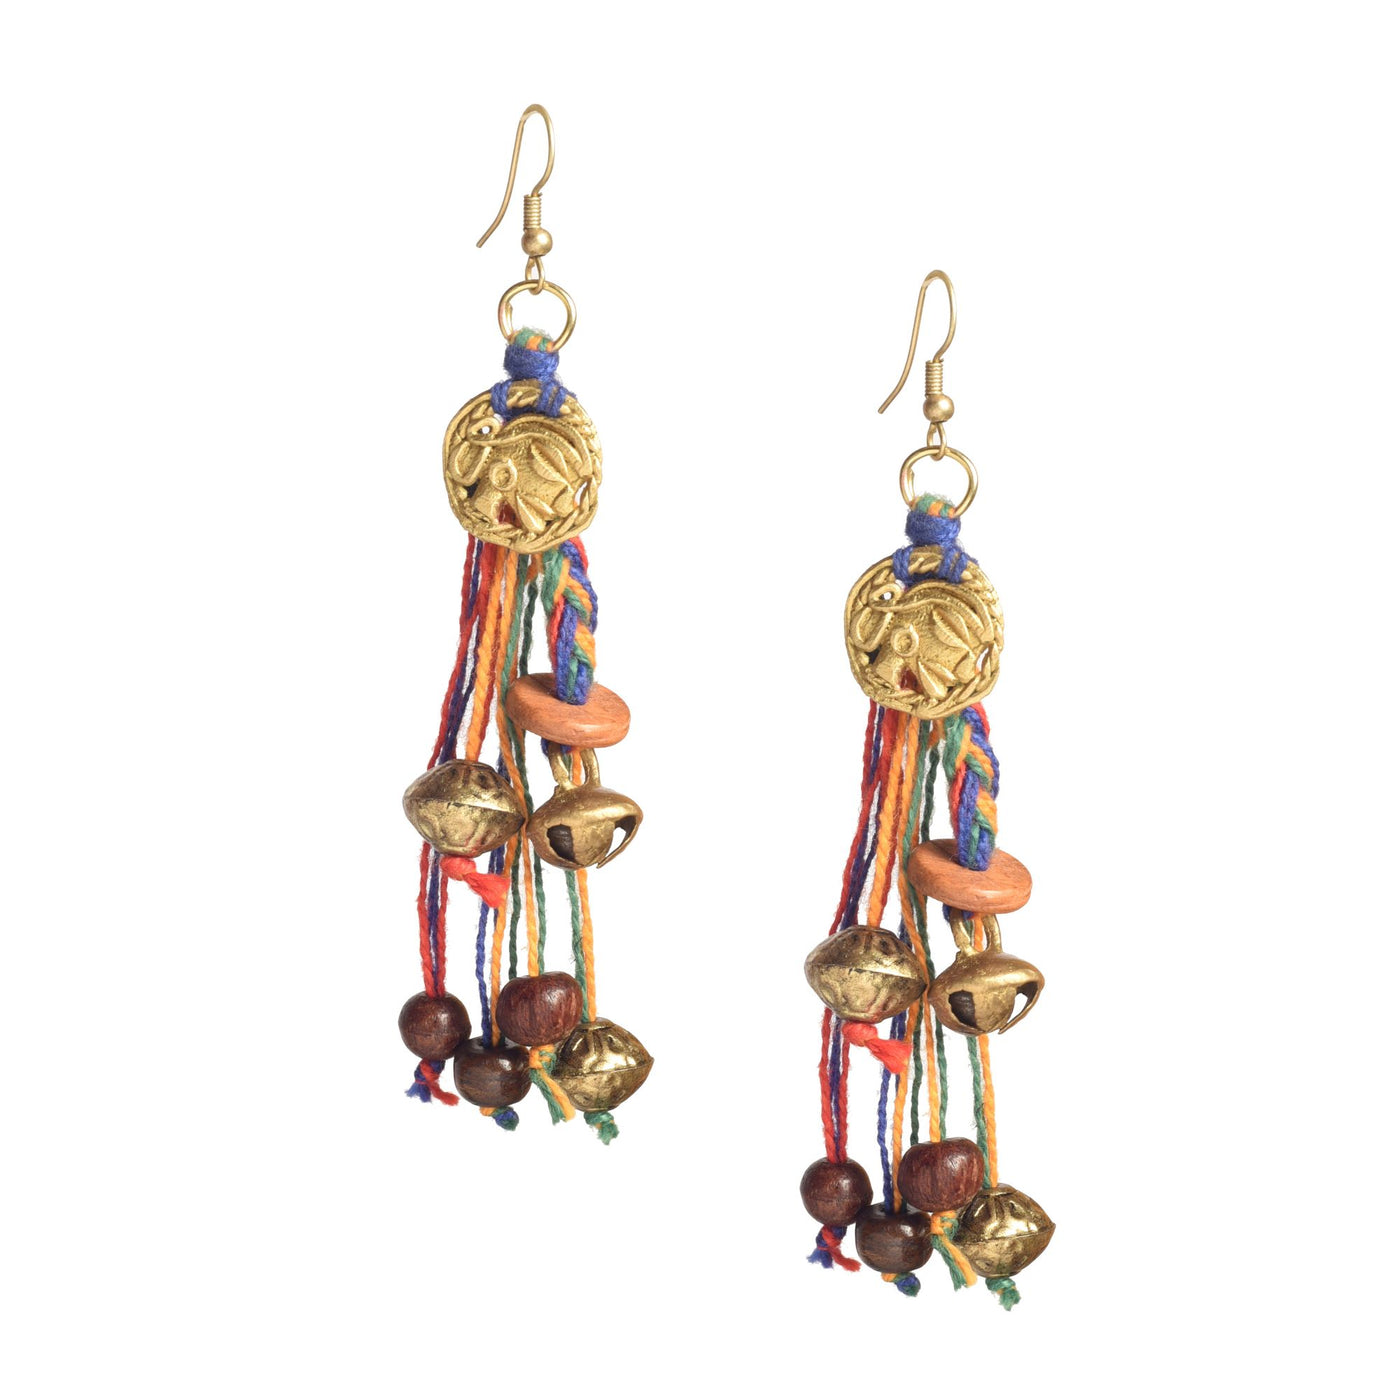 The Royal Court Handcrafted Tribal Earrings - Fashion & Lifestyle - 3